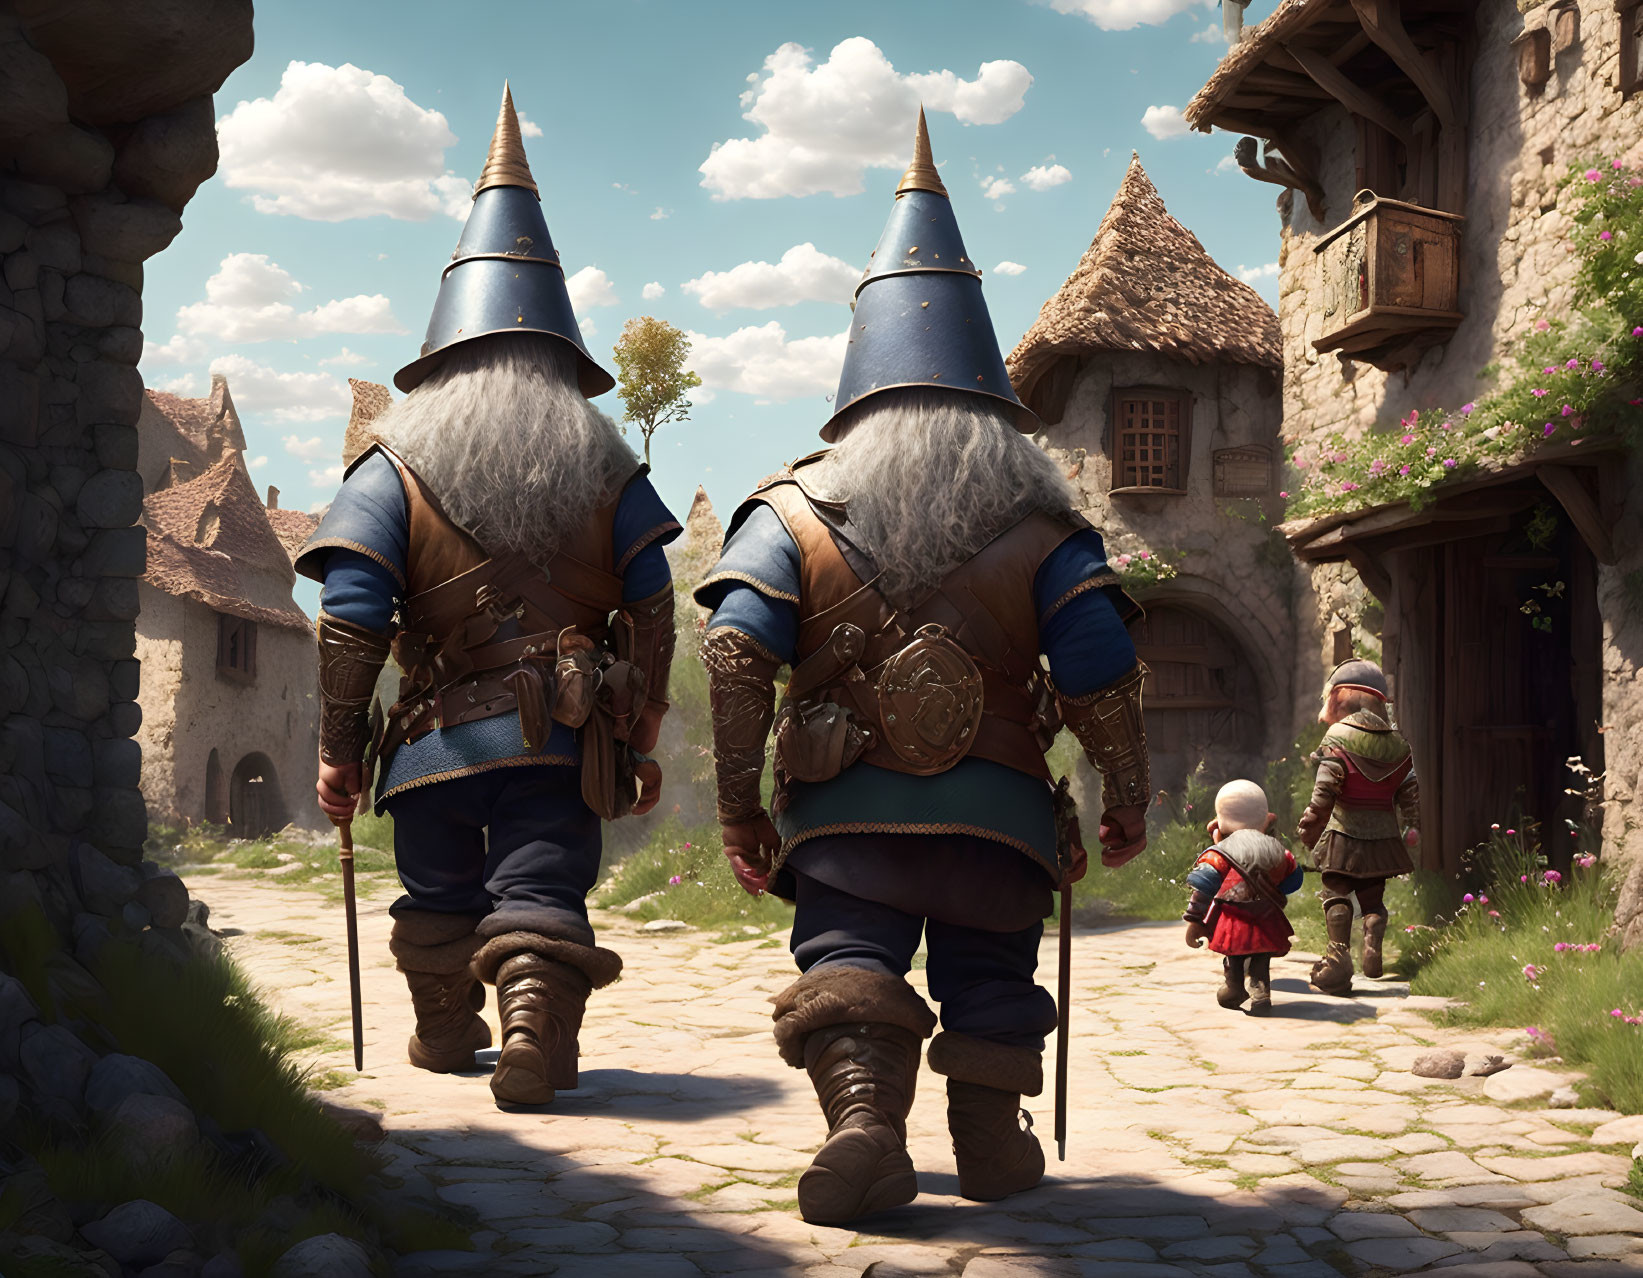 Armored dwarves with large helmets and walking sticks meet a village child on a sunny day